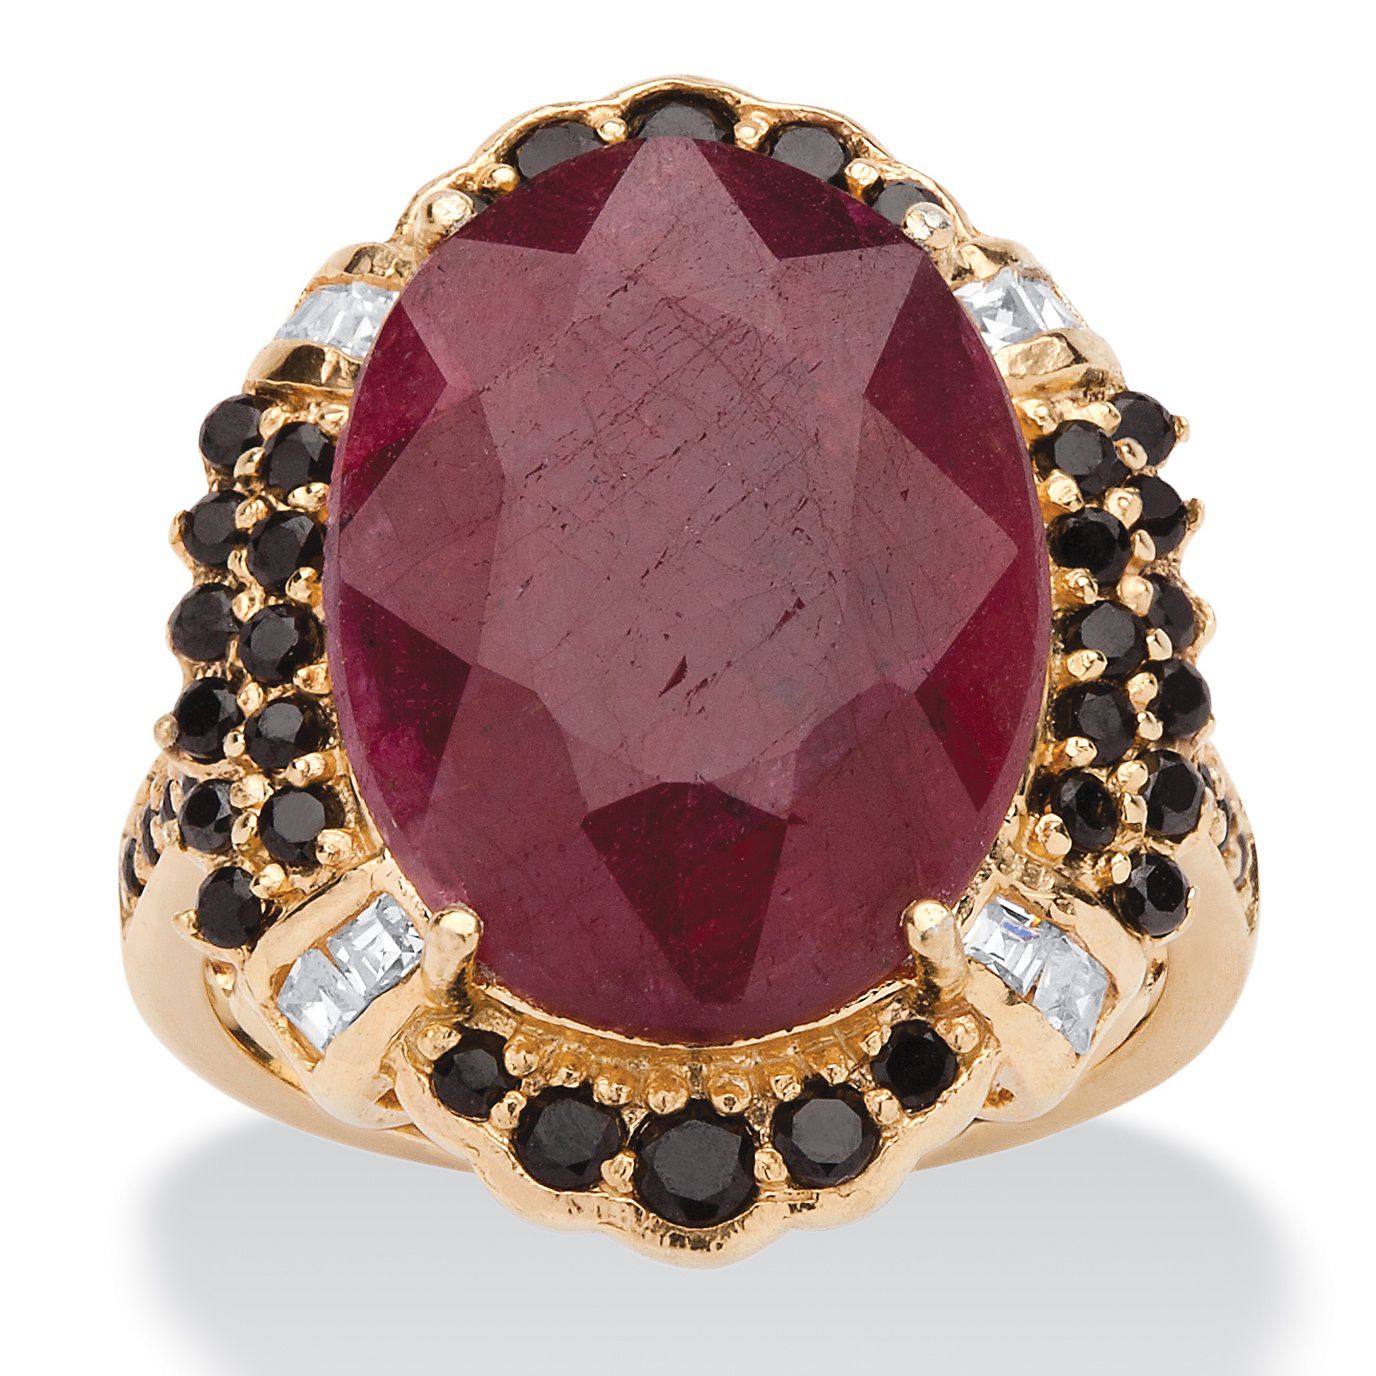 PalmBeach Jewelry 14K Gold-Plated Sterling Silver Oval Ruby, Black Spinel  and CZ Ring